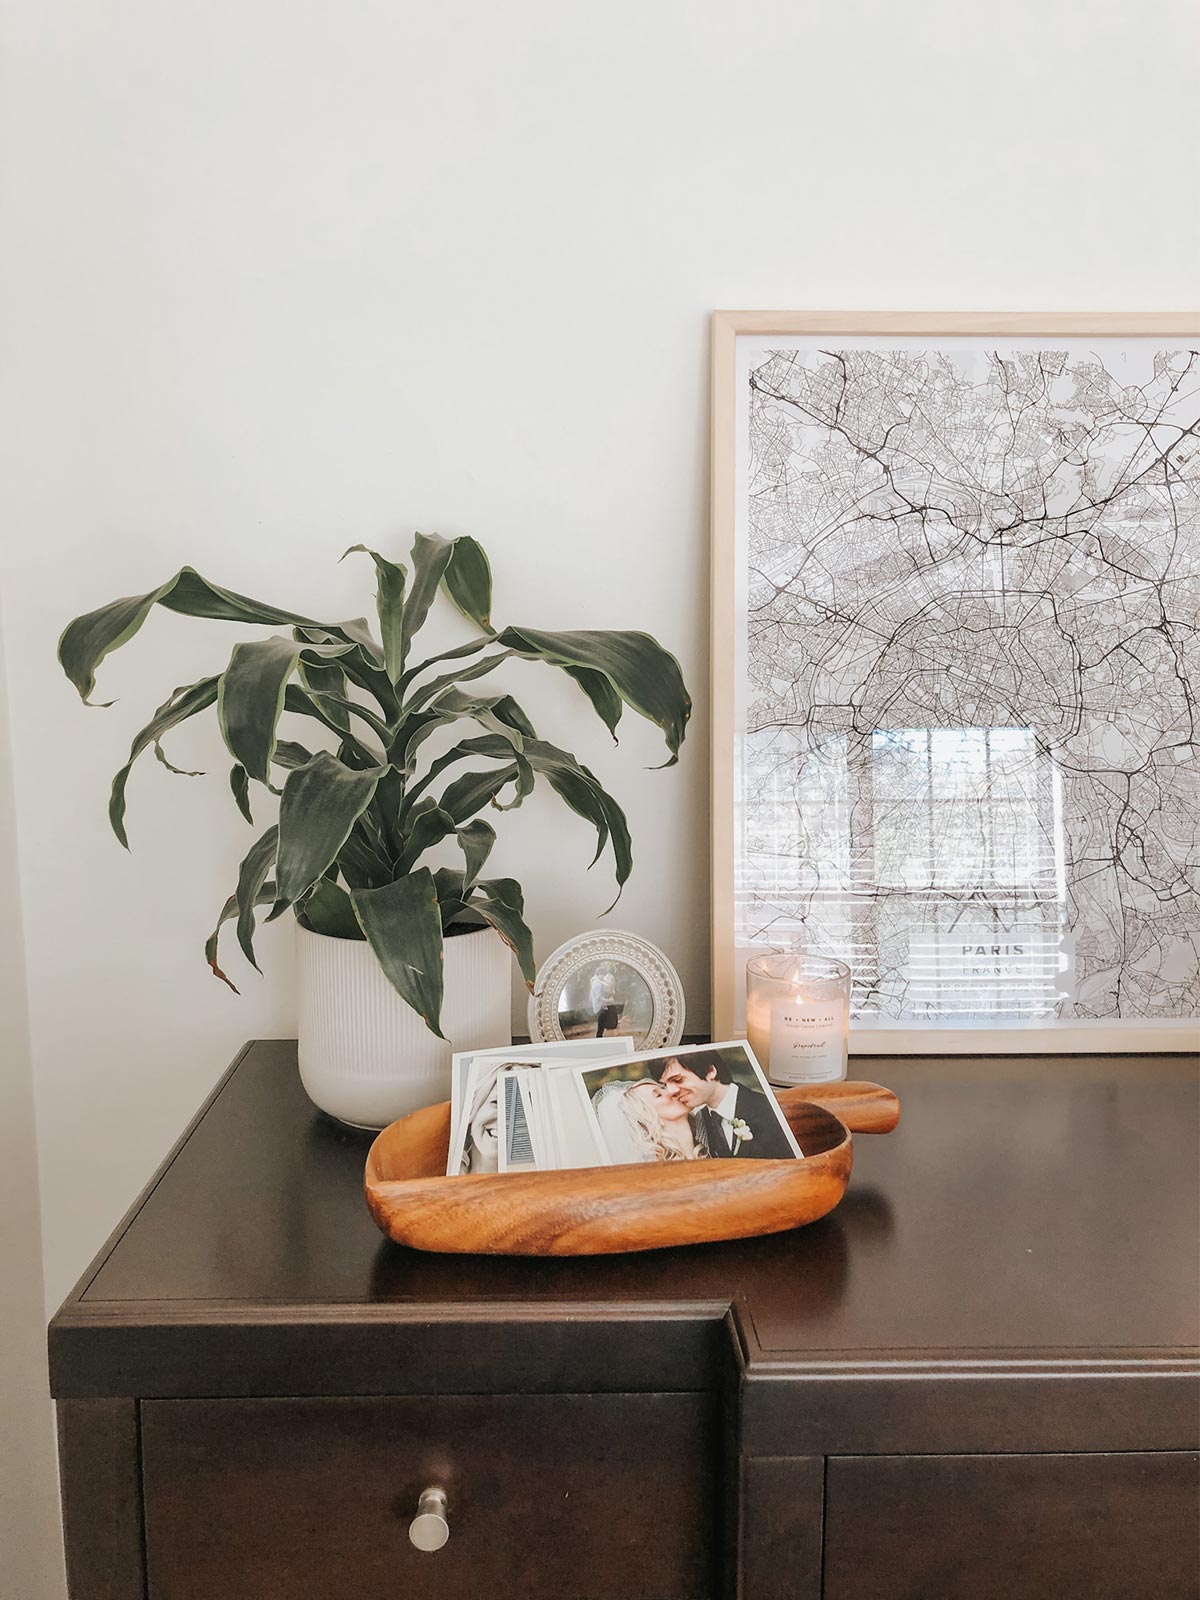 Artifact Uprising Square Prints in decorative wooden bowl on dresser next to plant and large framed photo of snow-covered tree branches